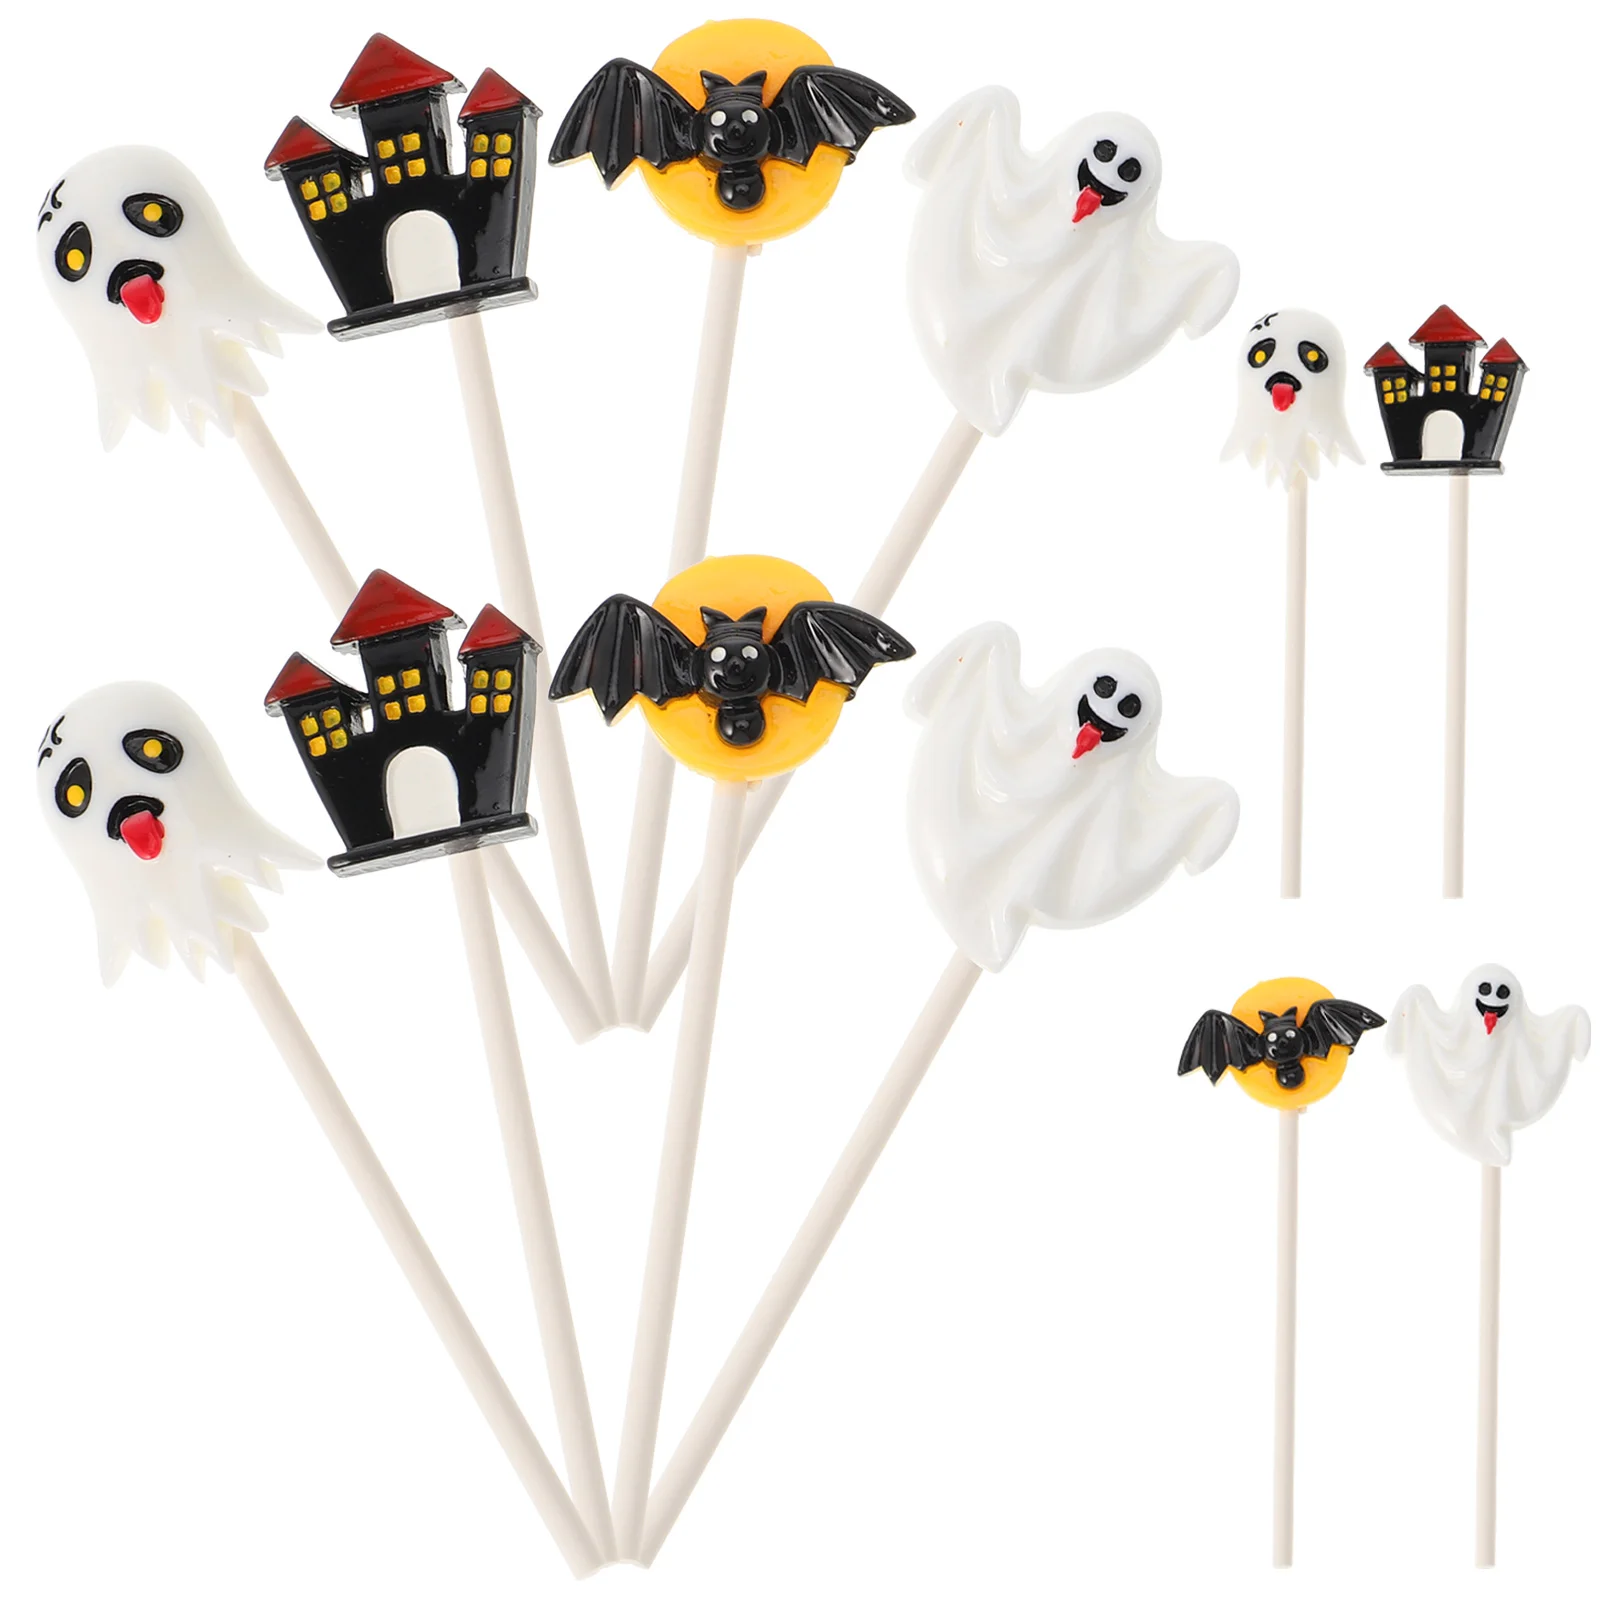 

12 Pcs Cakes Halloween Toppers Ghost Pumpkin Flags Insert Cards DIY Cupcake Plug-in